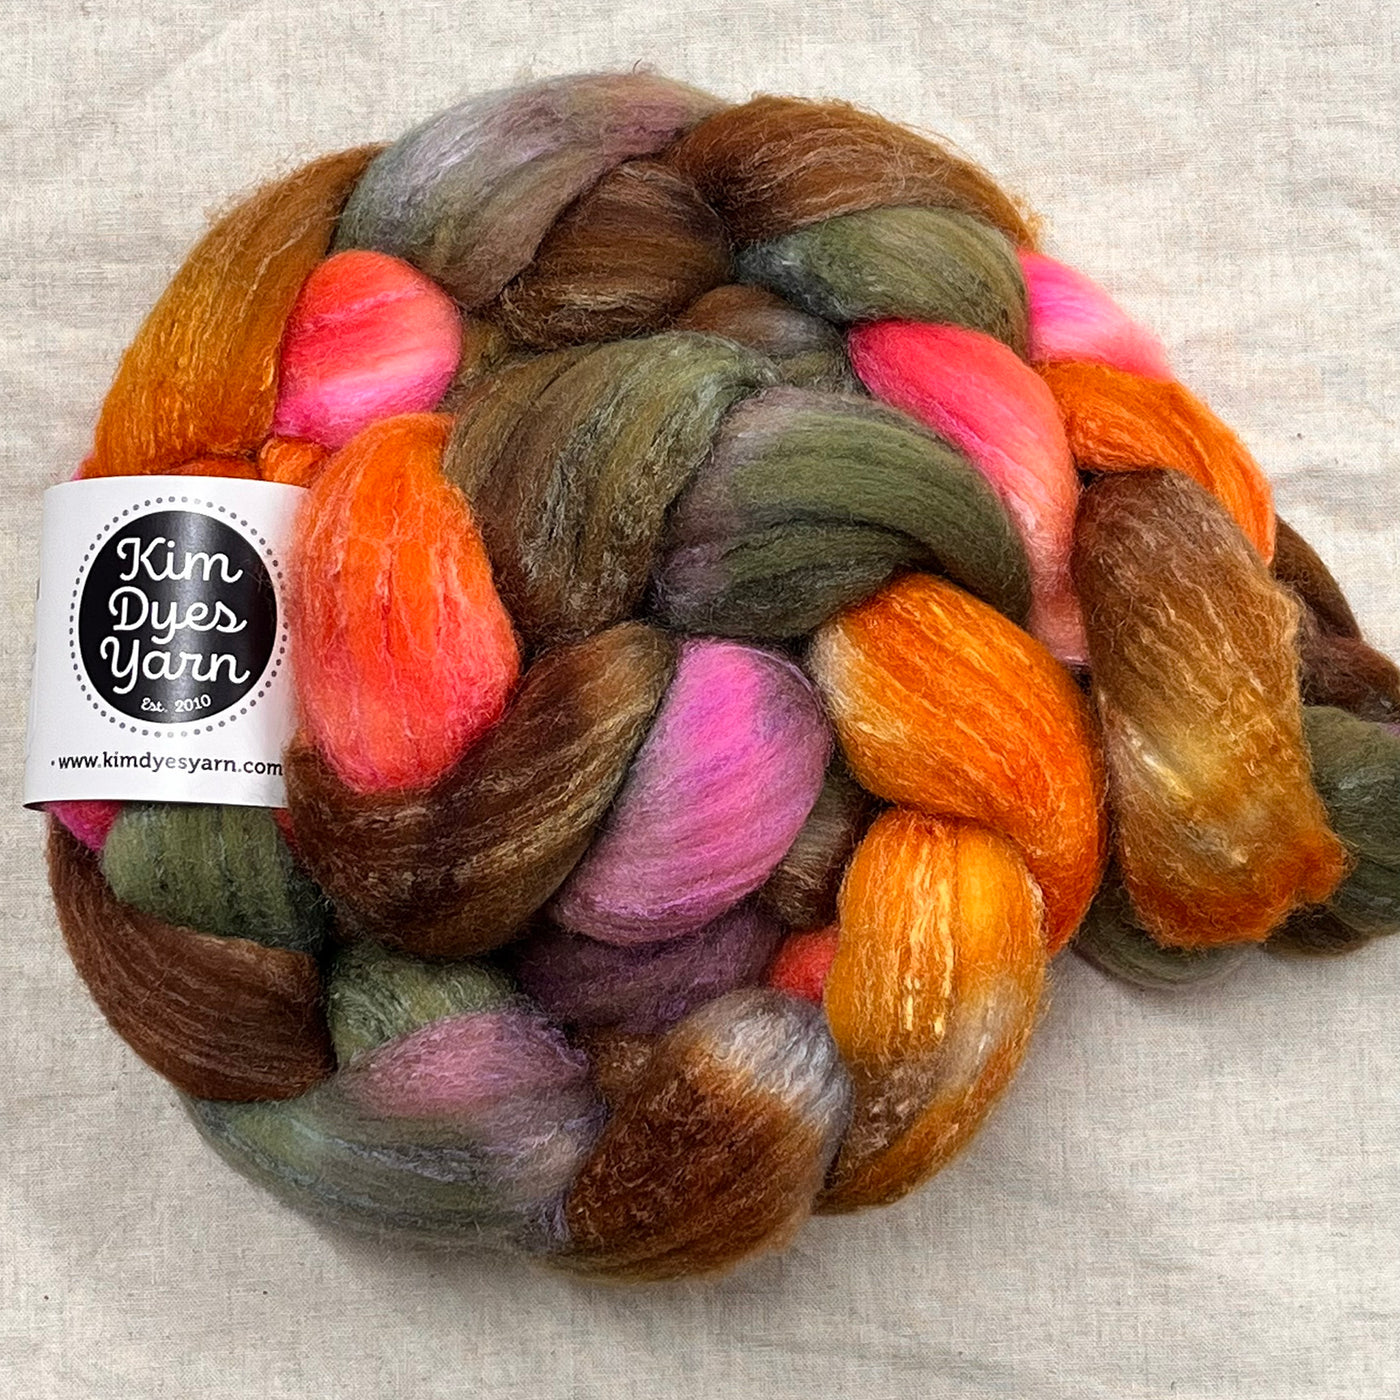 Kim Dyes Yarn Rambouillet/Silk Combed Top